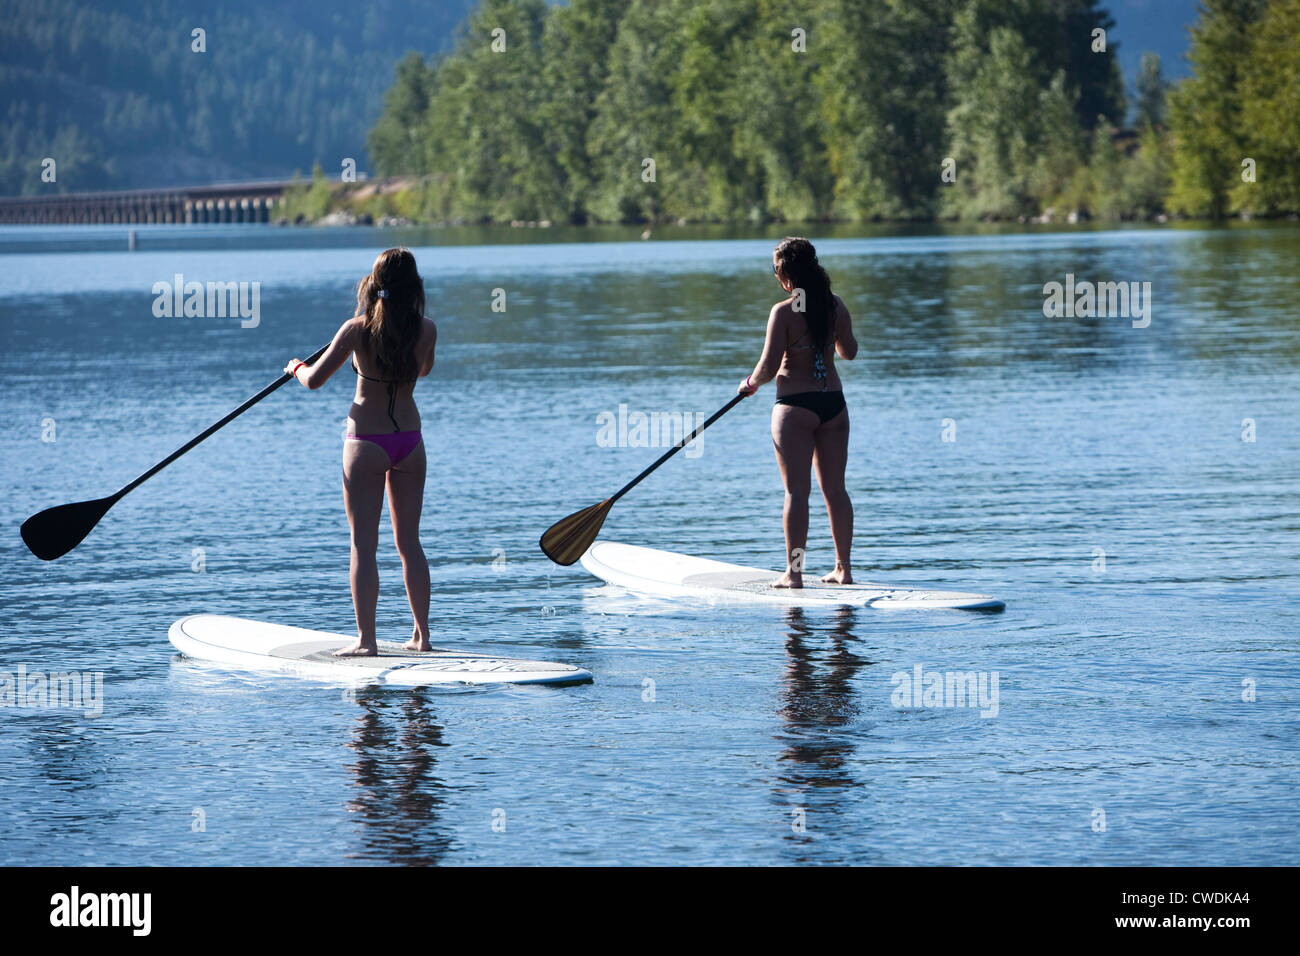 Two athletic young women stand up paddle board on a lake in Idaho on a sunny day. Stock Photo